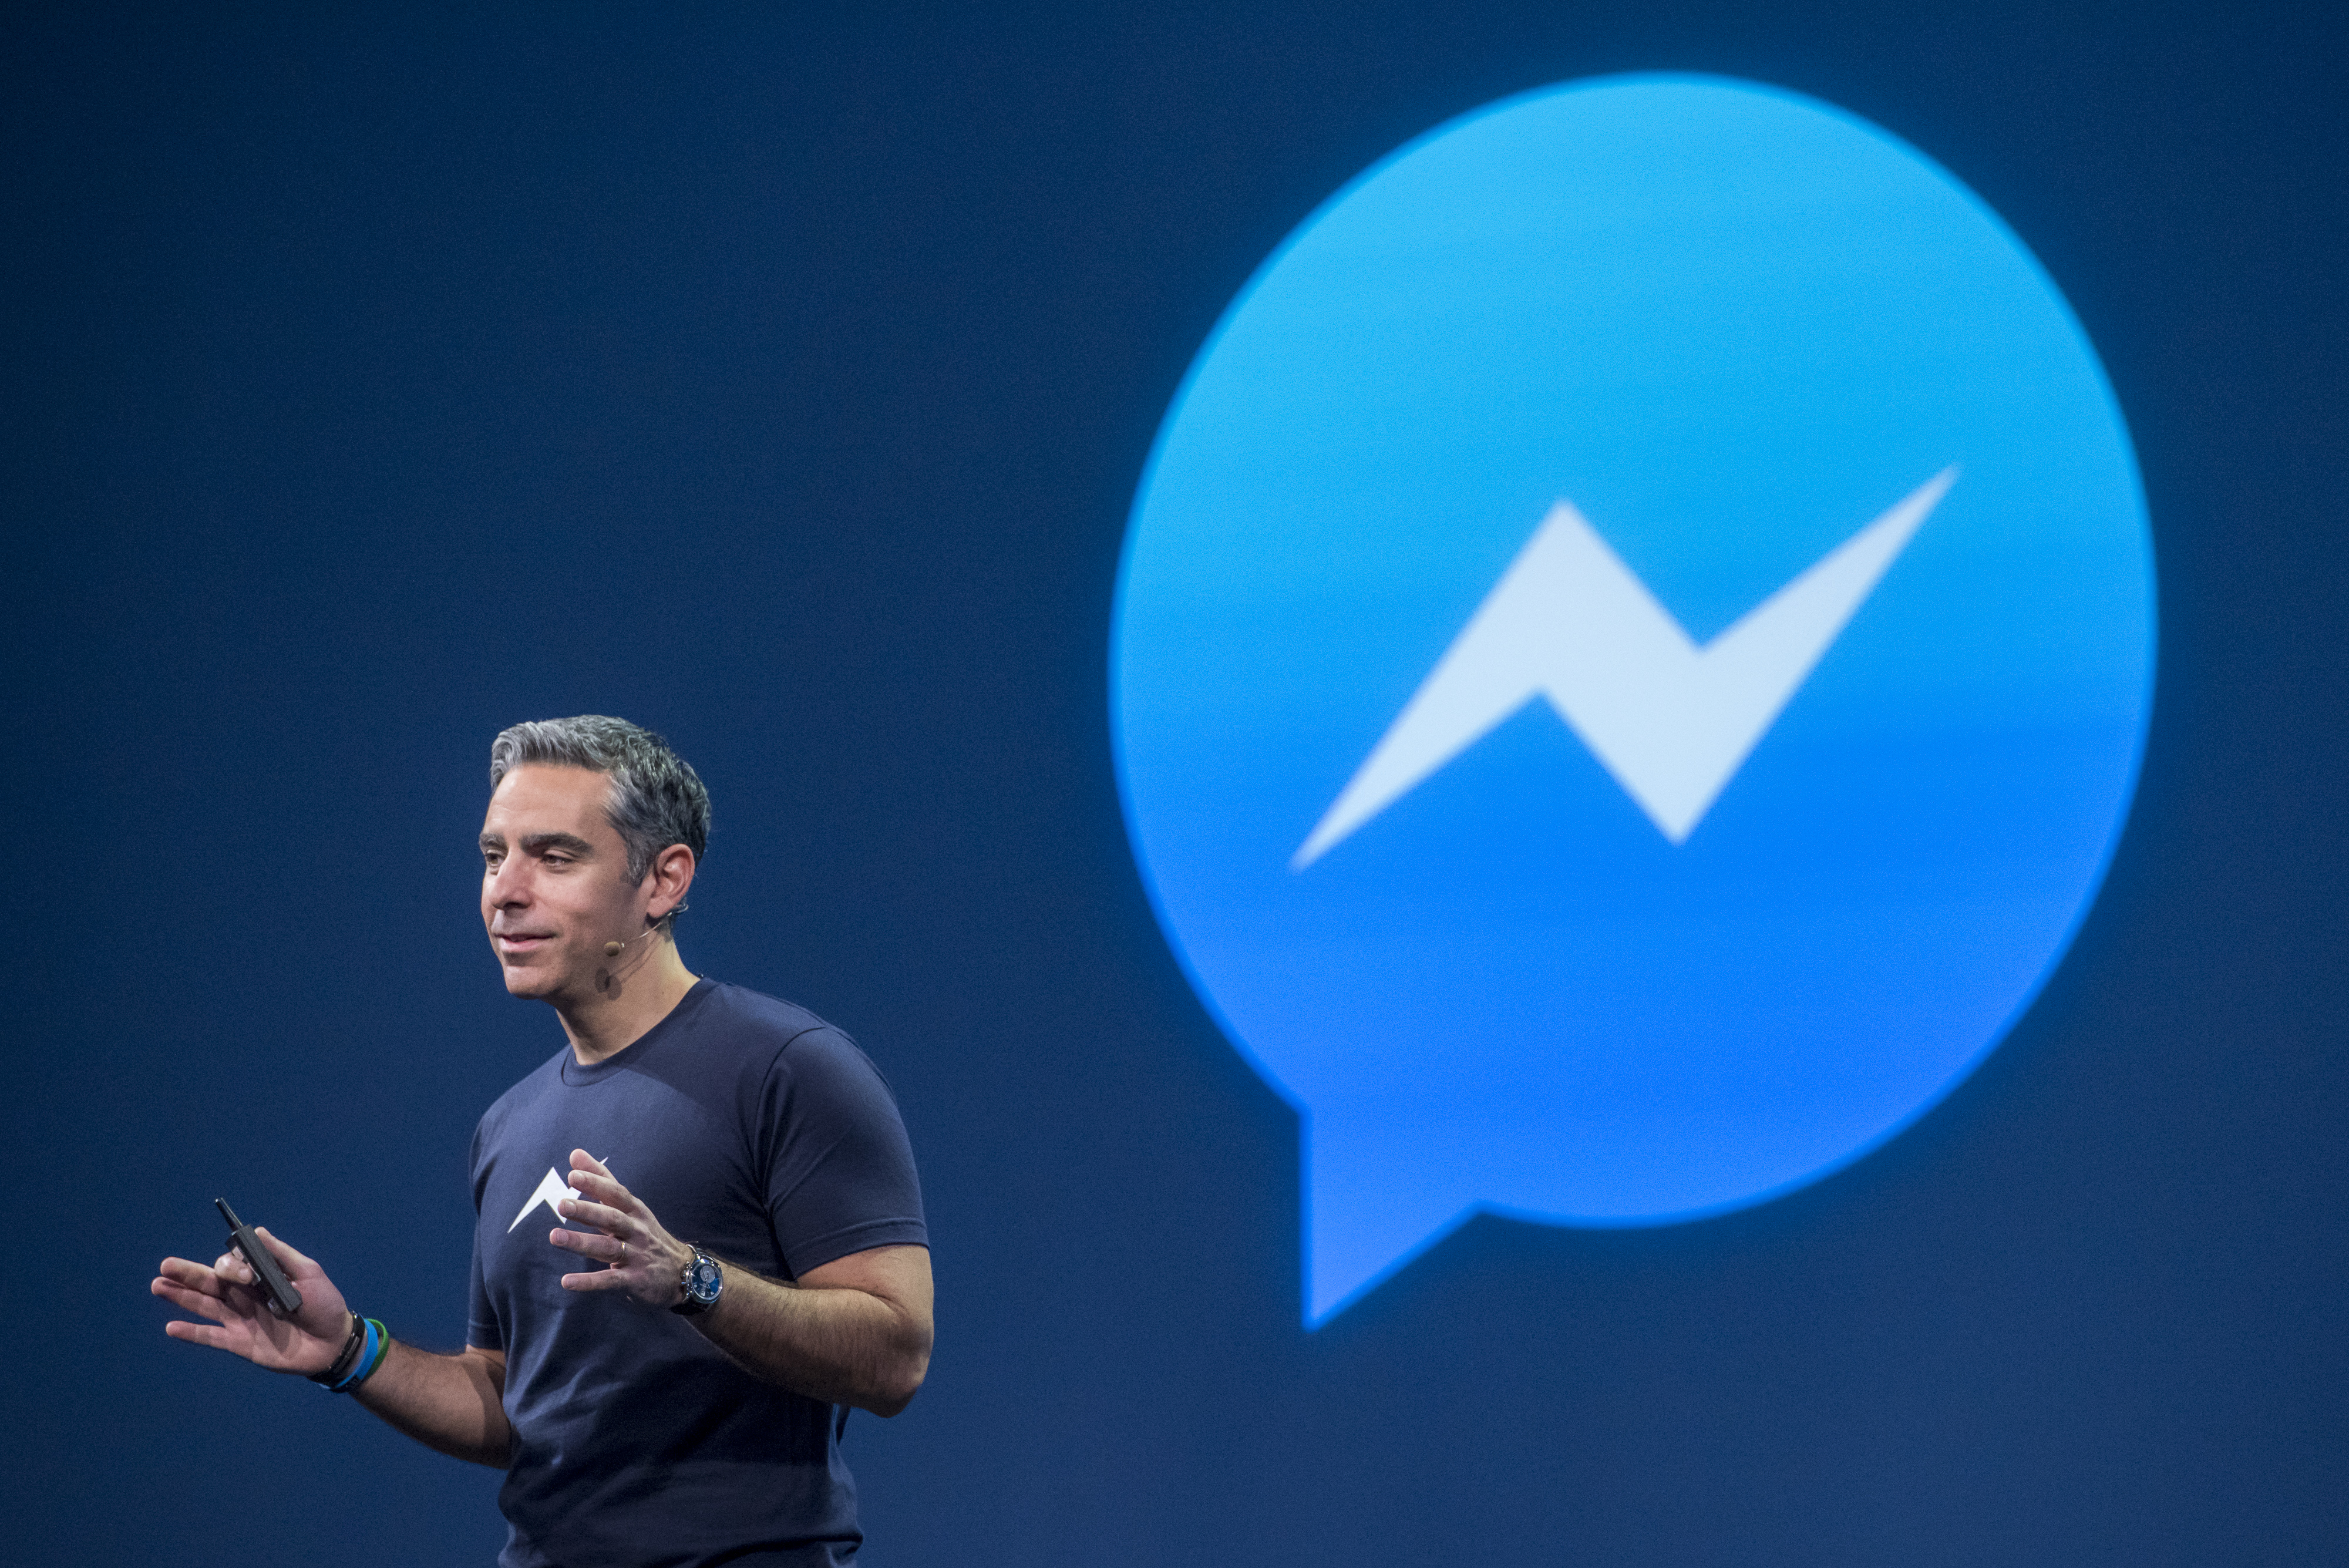 David Marcus, vice president of messaging products at Facebook Inc., speaks during the Facebook F8 Developers Conference in San Francisco, California, U.S., on Wednesday, March 25, 2015. (Bloomberg&mdash;Bloomberg via Getty Images)